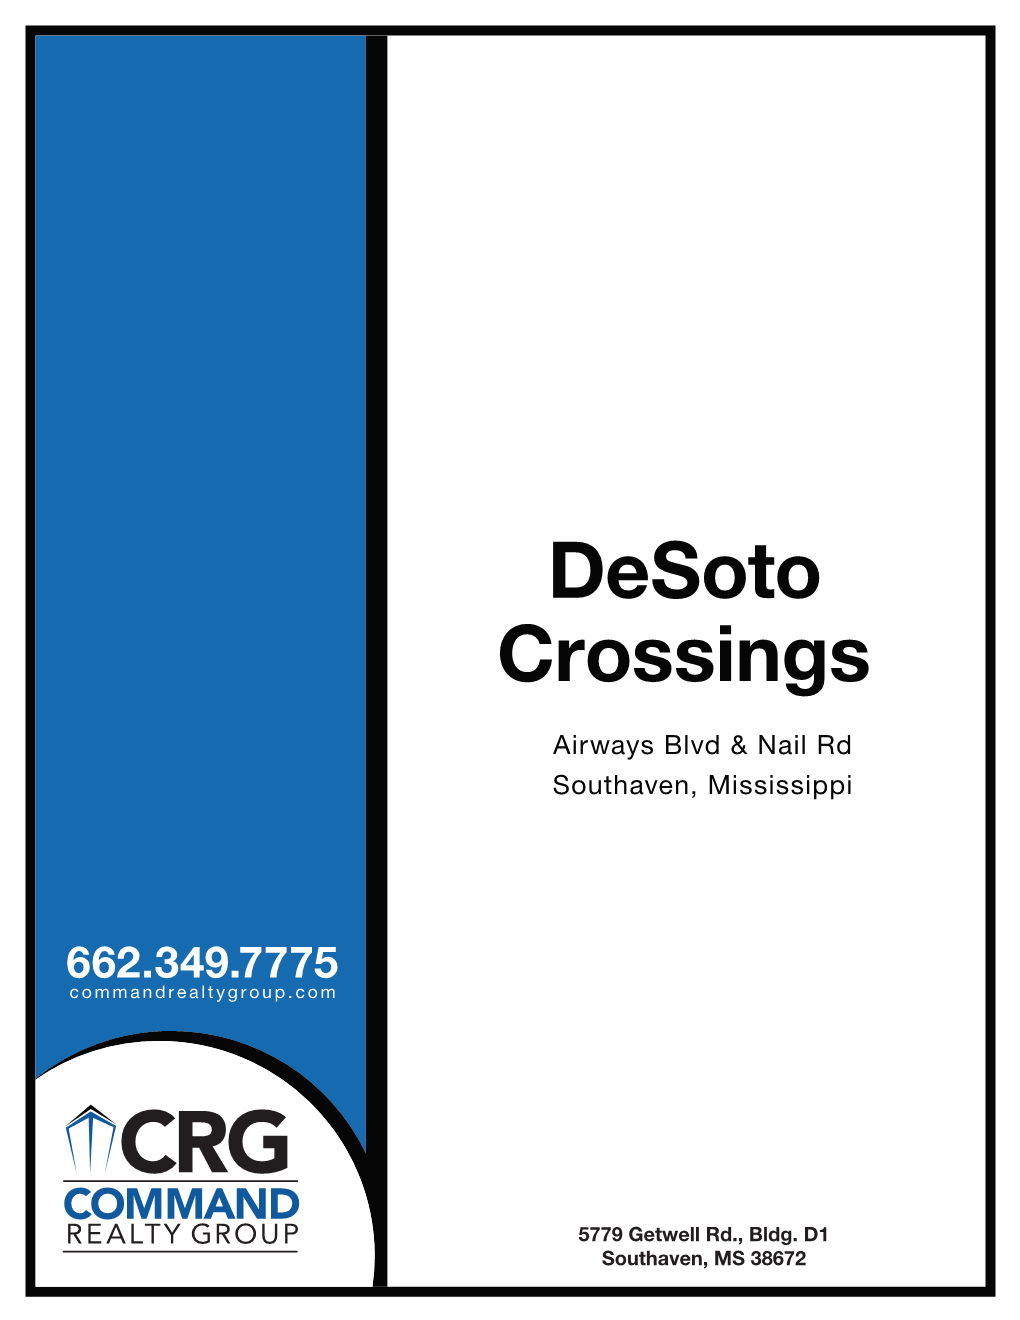 Desoto Crossings Airways Blvd & Nail Rd Southaven, Mississippi Table of Contents